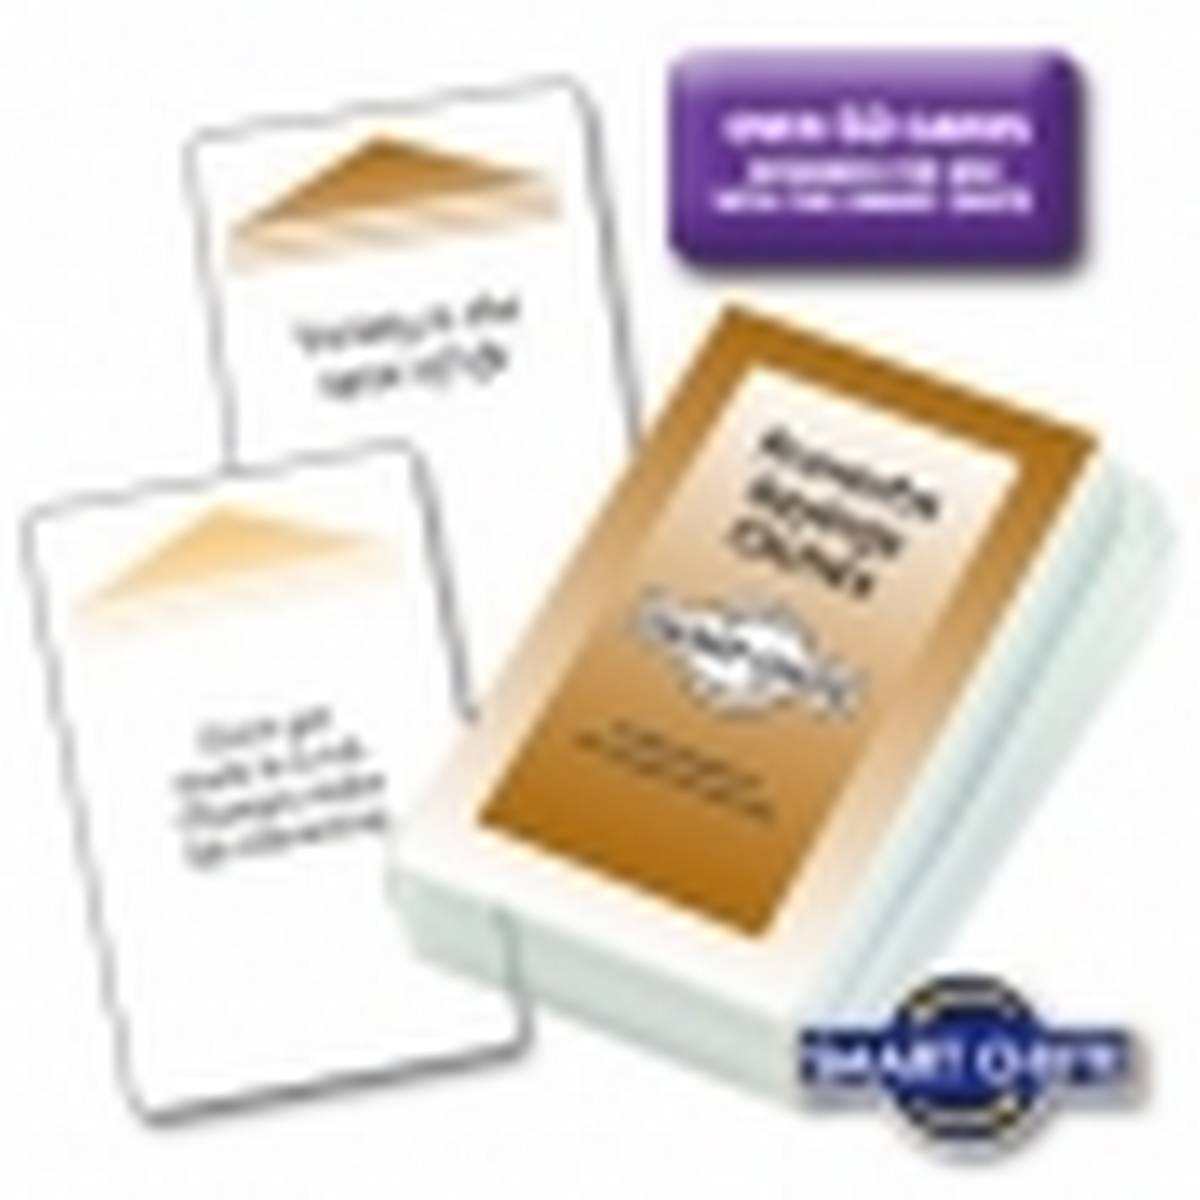 Proverbs, Sayings and Cliches Chute Cards